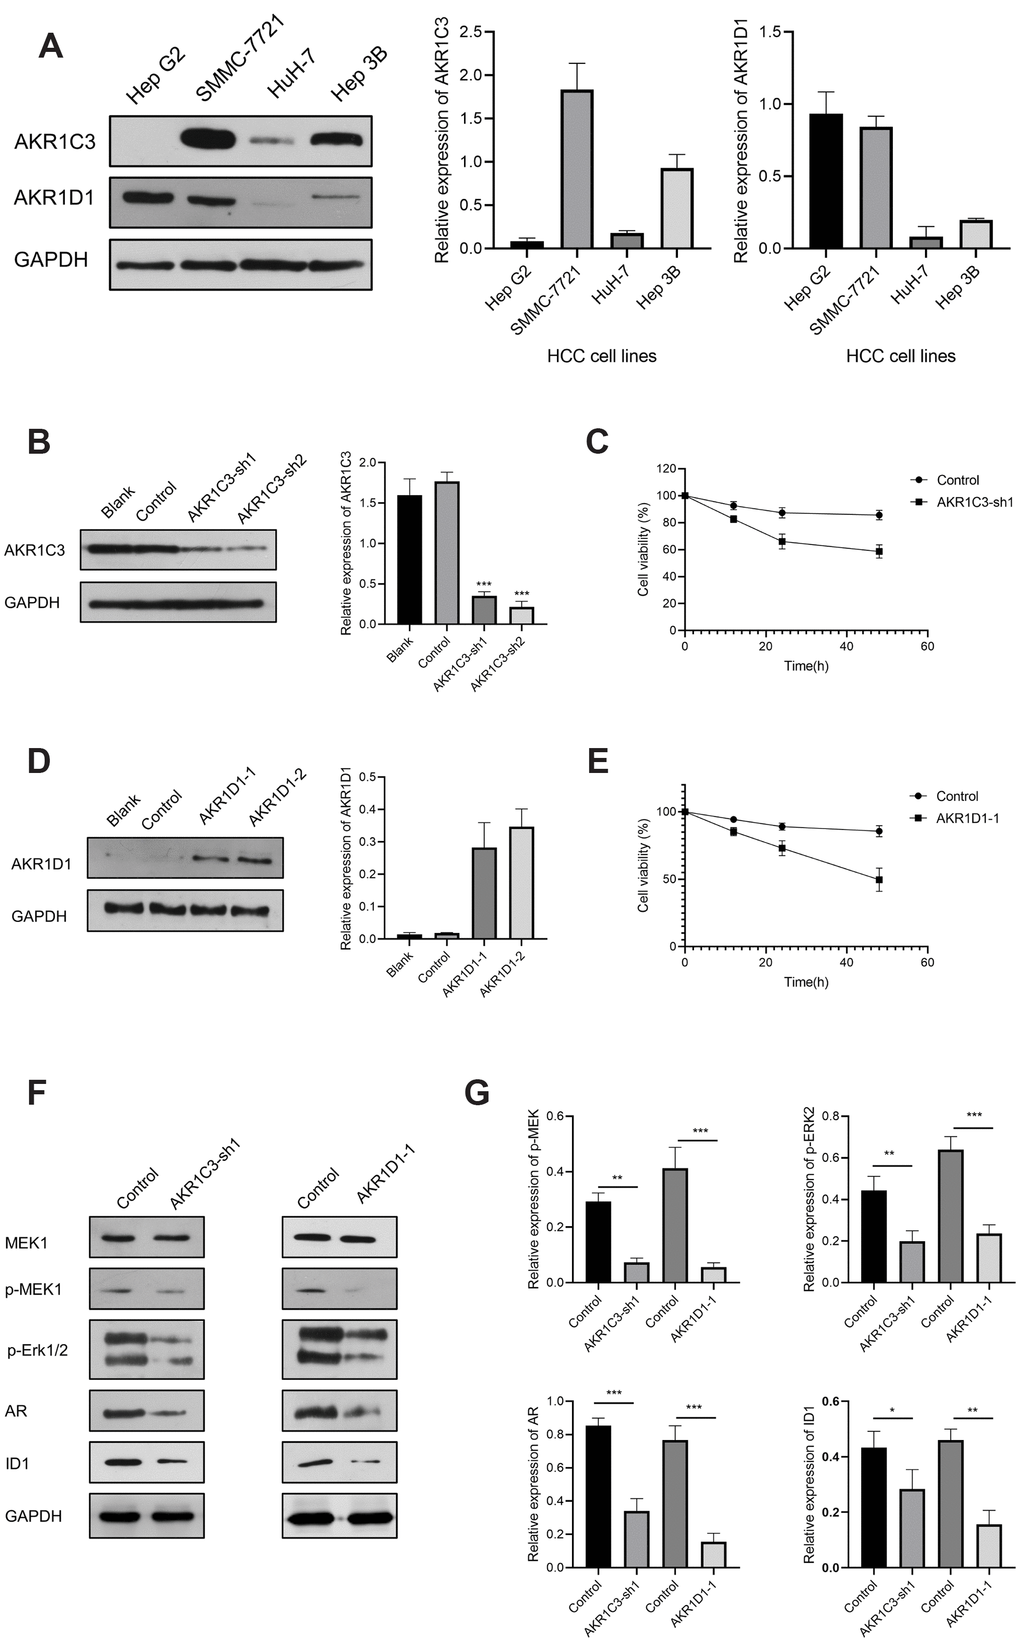 The results of AKR1C3 and AKR1D1 lentiviral transfection. (A) Relative protein expression of AKR1C3 and AKR1D1 in HCC cell lines. (B) The protein level of AKR1C3 in SMMC-7721 cells after the knockdown. (C) The cell viability of sh-AKR1C3 and control groups. (D) The protein level of AKR1D1 in HuH-7 cells after overexpression. (E) The cell viability of AKR1D1-1 and control groups. (F, G) The protein levels of MEK1, p-MEK1, p-Erk1/2, AR, and ID1 in the AKR1C3 knockdown and AKR1D1 overexpression cells.